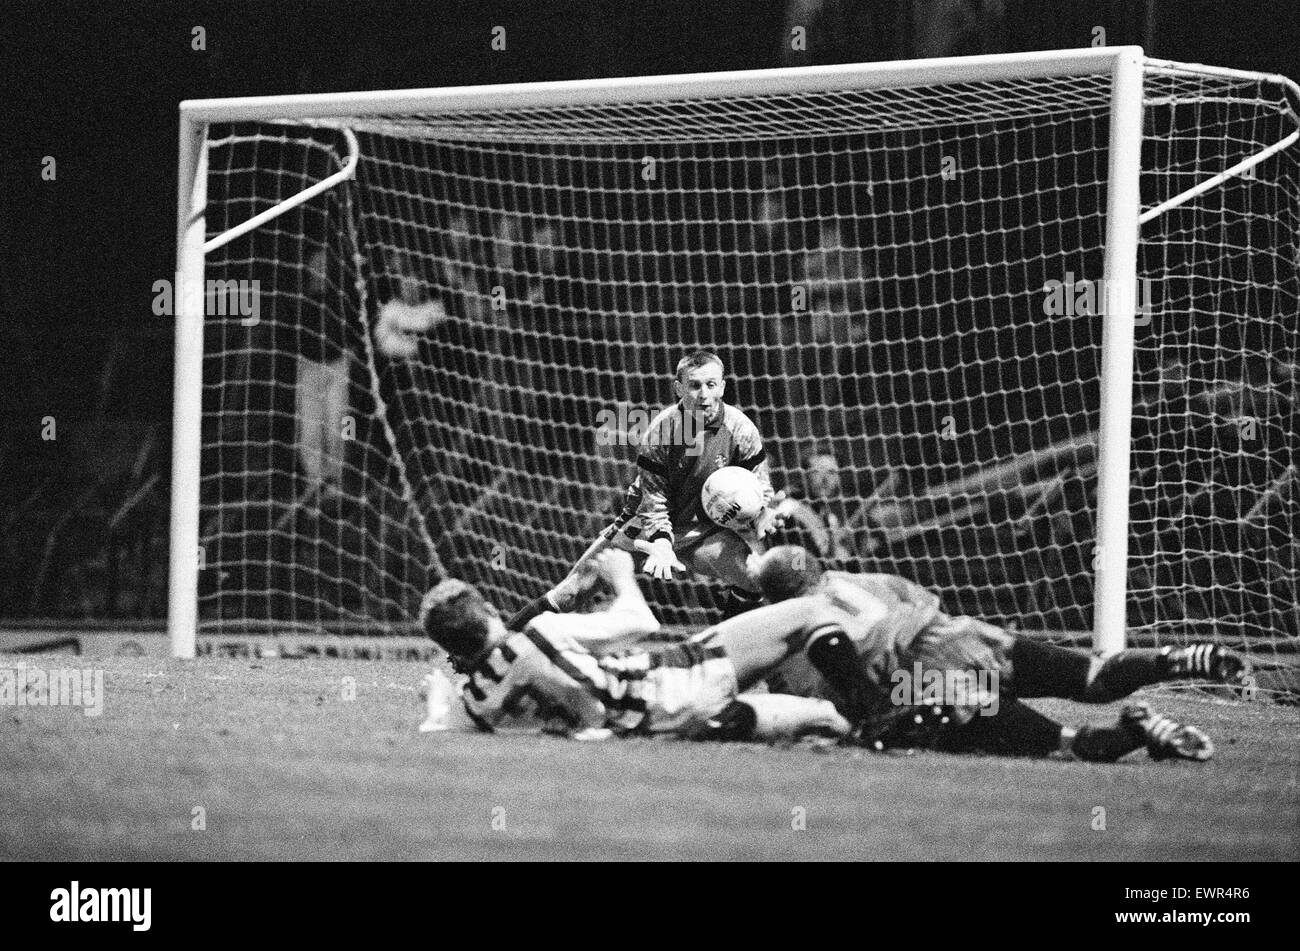 Huddersfield 2-1 Bury, Division 3 League match at Leeds Road, Saturday 22nd December 1990. Kieran O'Regan in goal against Bury after replacing Lee Martin who was sent off. Stock Photo